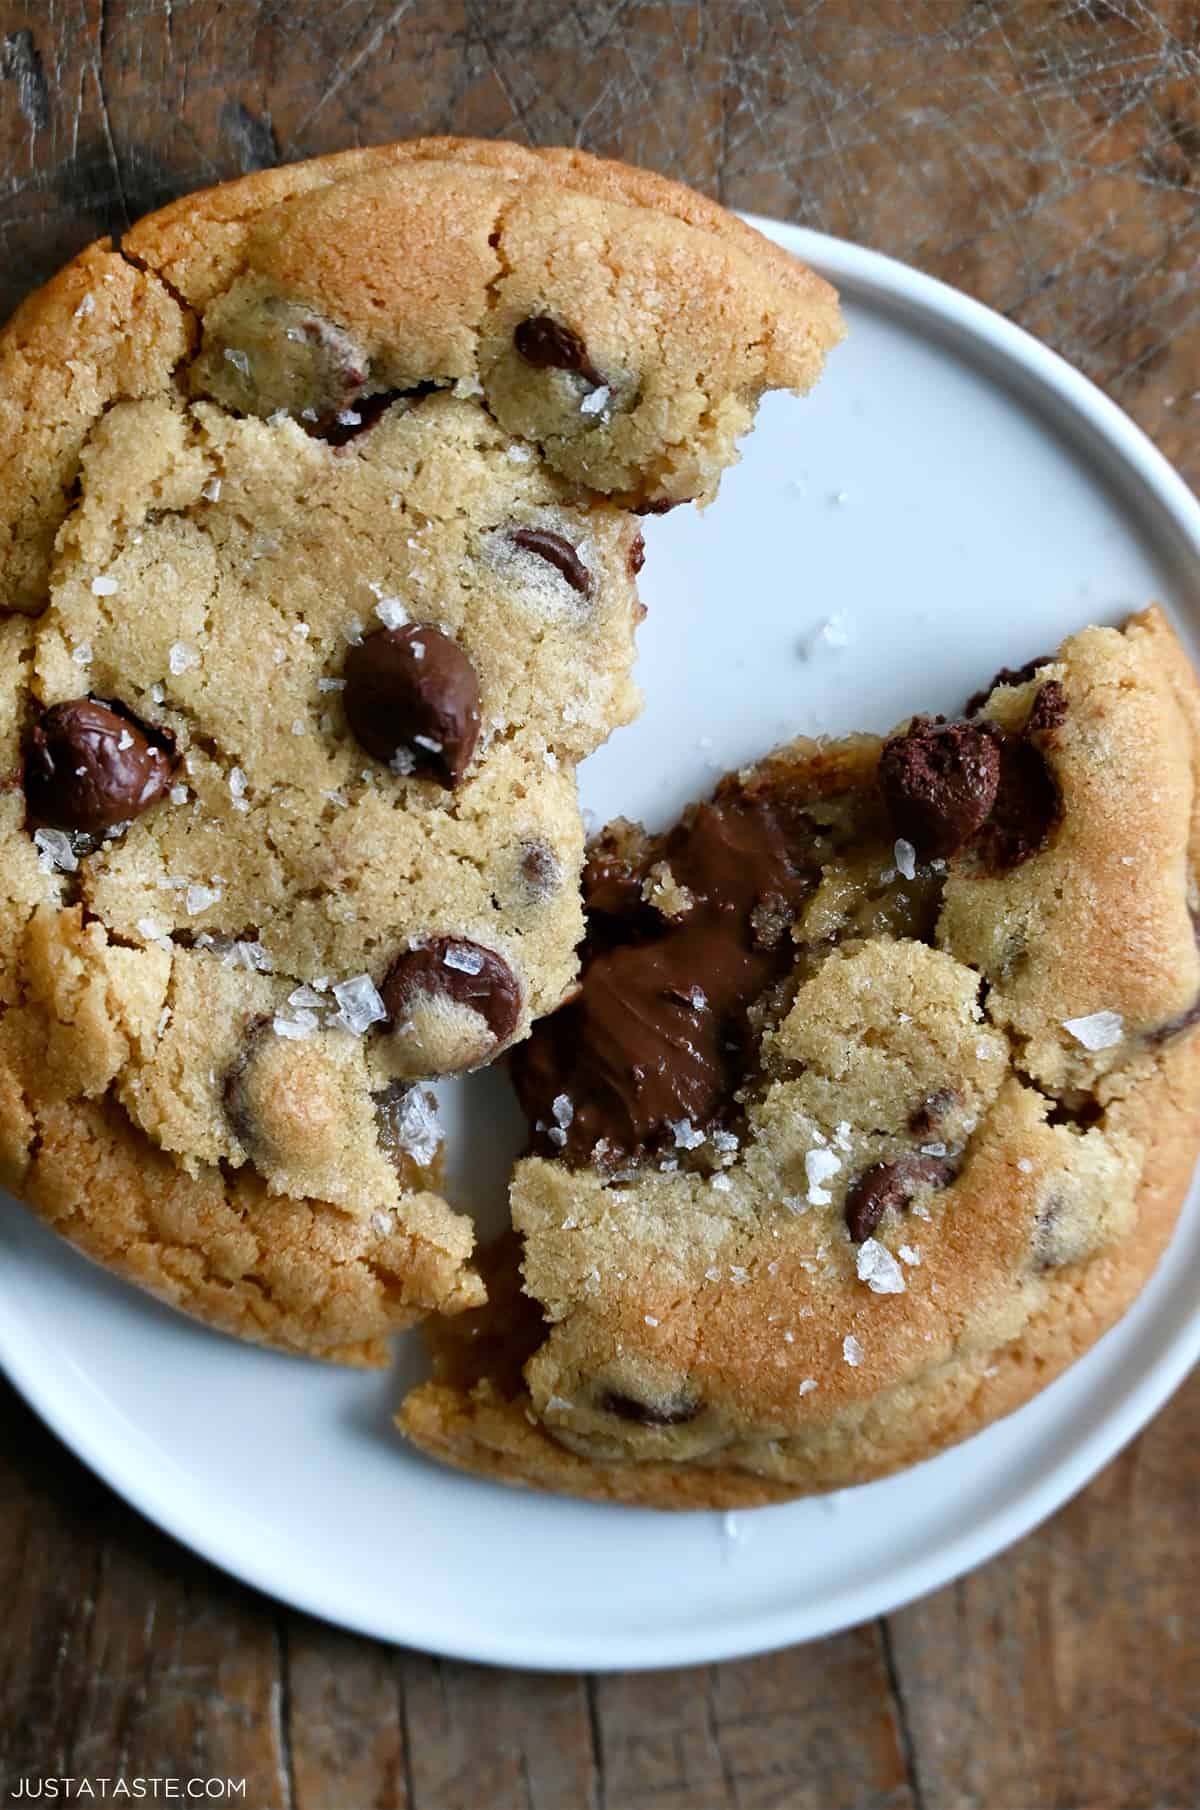 A chocolate chip cookie broken in half with a gooey Nutella filling.